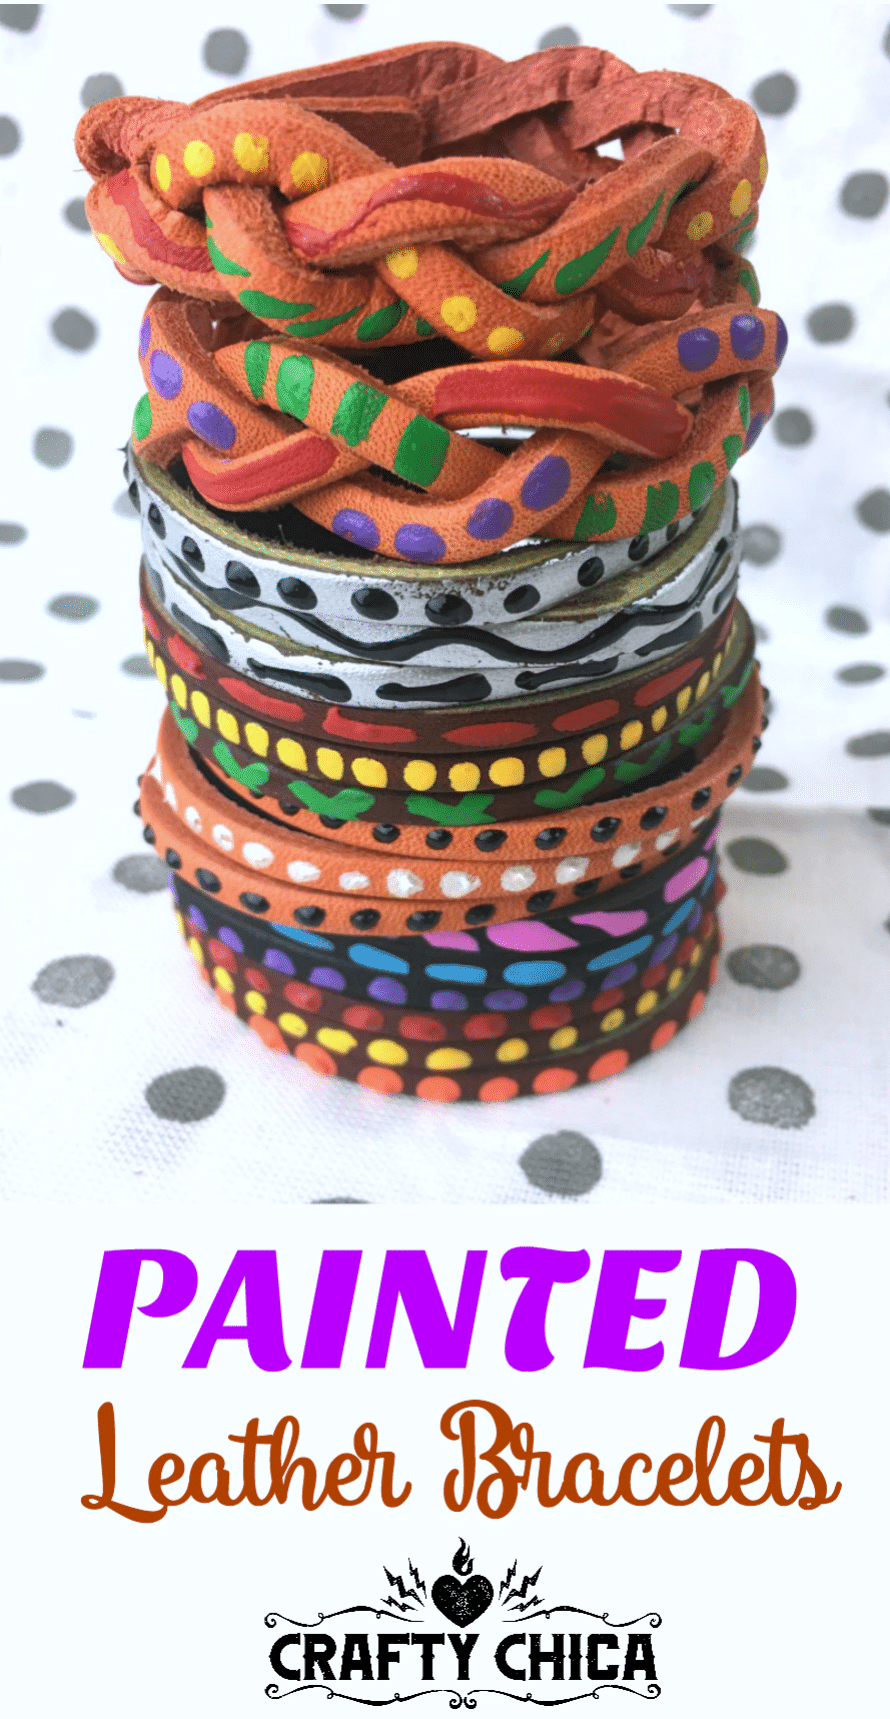 Painted leather bracelets by CraftyChica.com